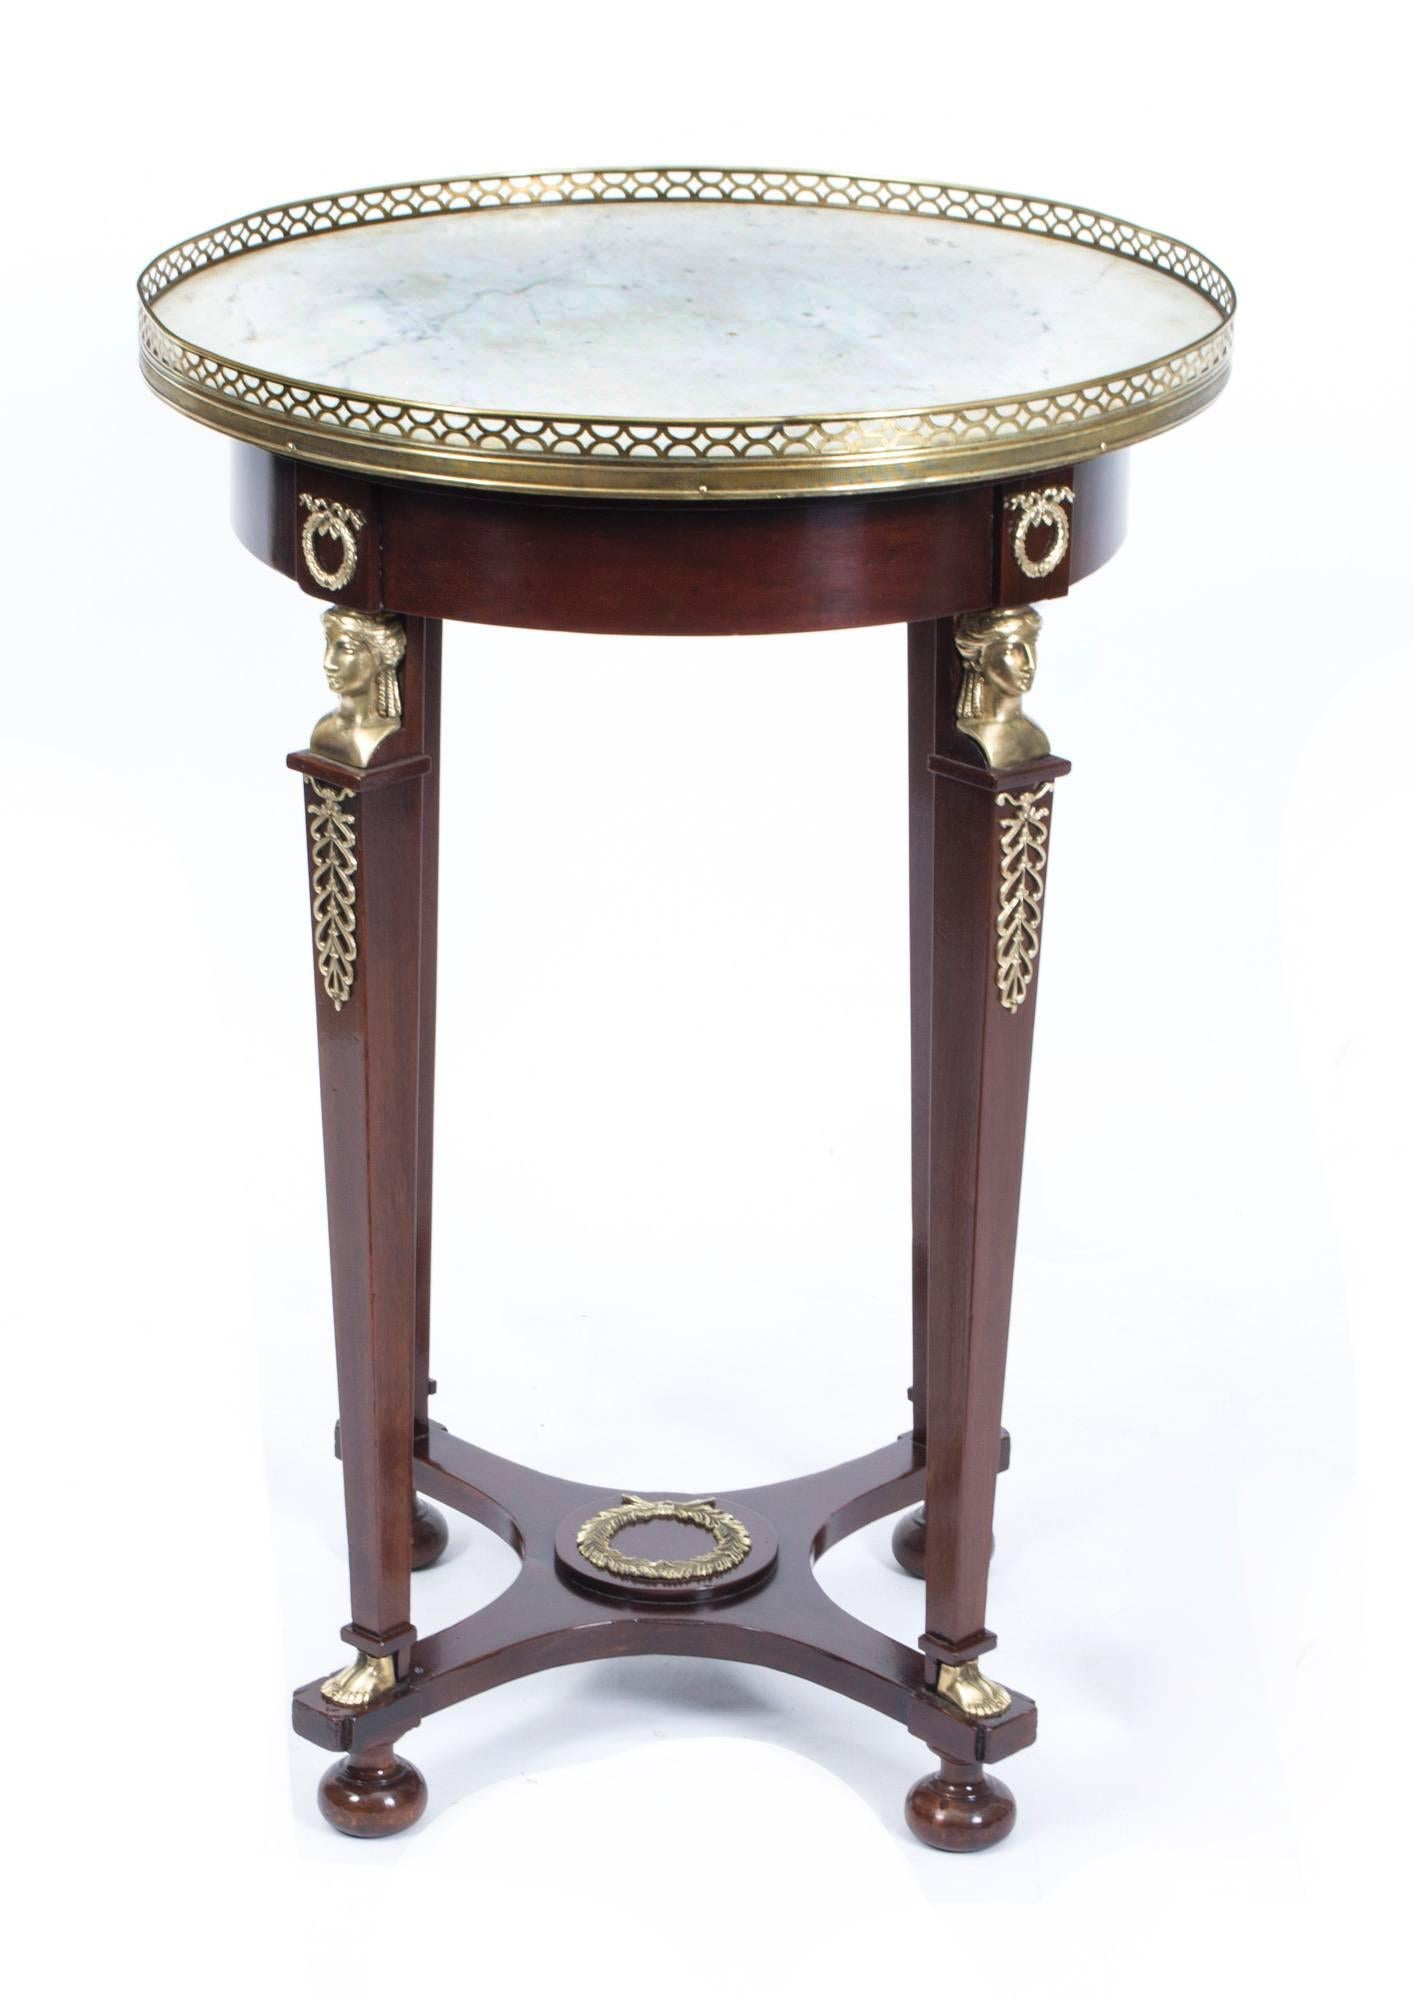 This is a beautiful antique French Empire circular centre table with ornate ormolu decoration typical of the Empire period and a beautiful inset white "Marmo di Carrara" marble top, dating from, circa 1830.

It is masterfully crafted in